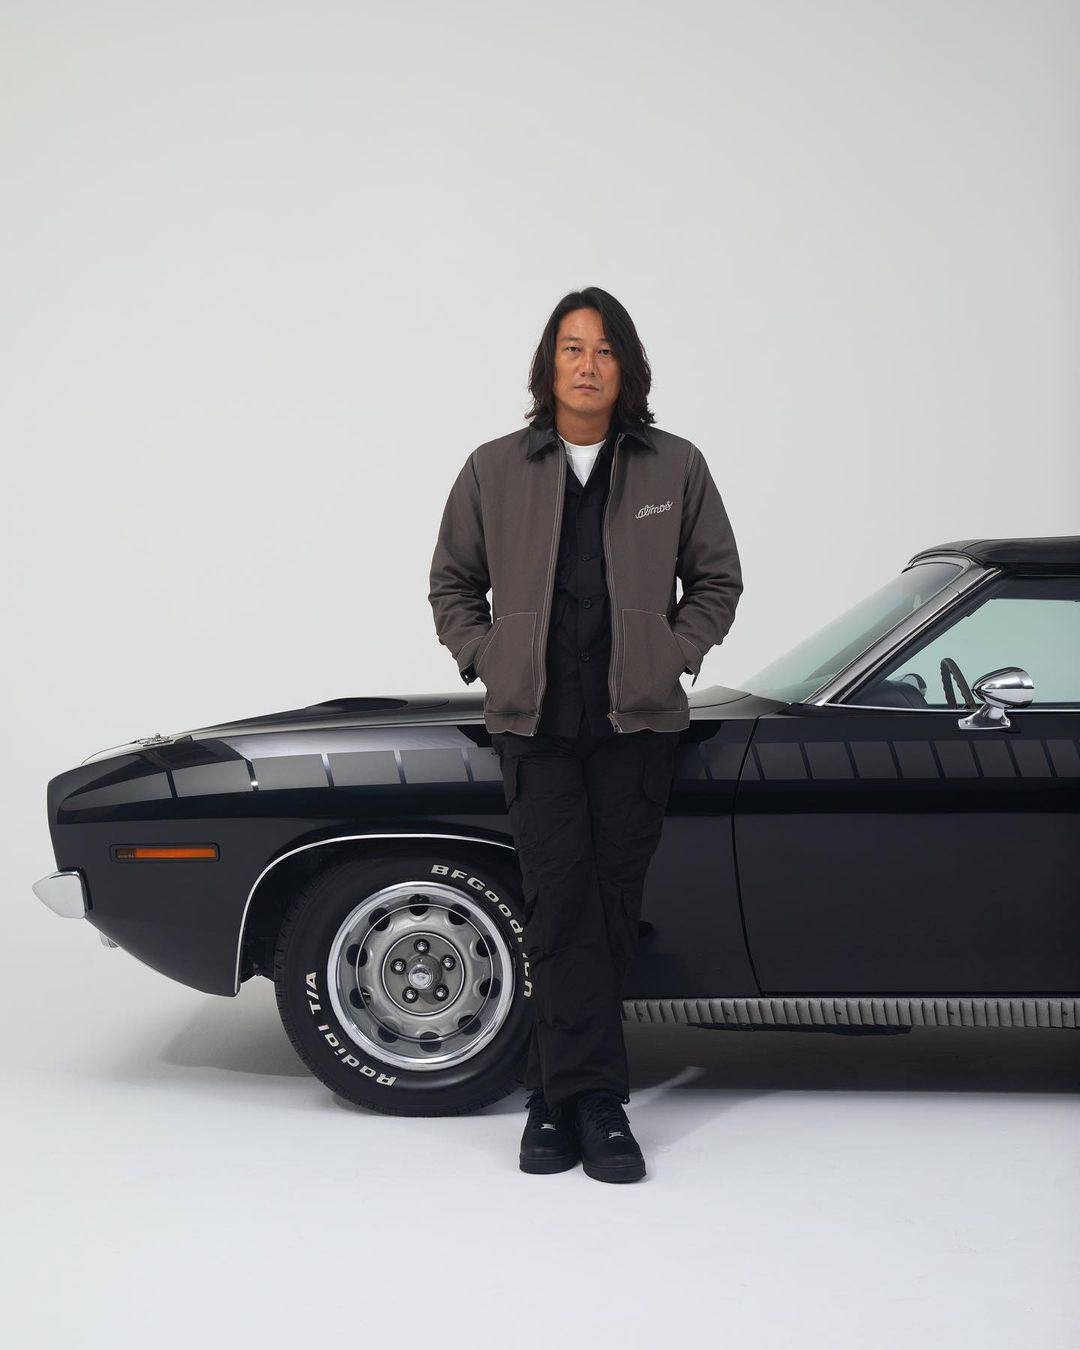 Sung Kang is best known for his role in the Fast & Furious series. The Korean-American actor opens up about discrimination in Hollywood, and making his directorial debut, a horror comedy inspired by Evil Dead. Photo: Instagram/@sungkangsta